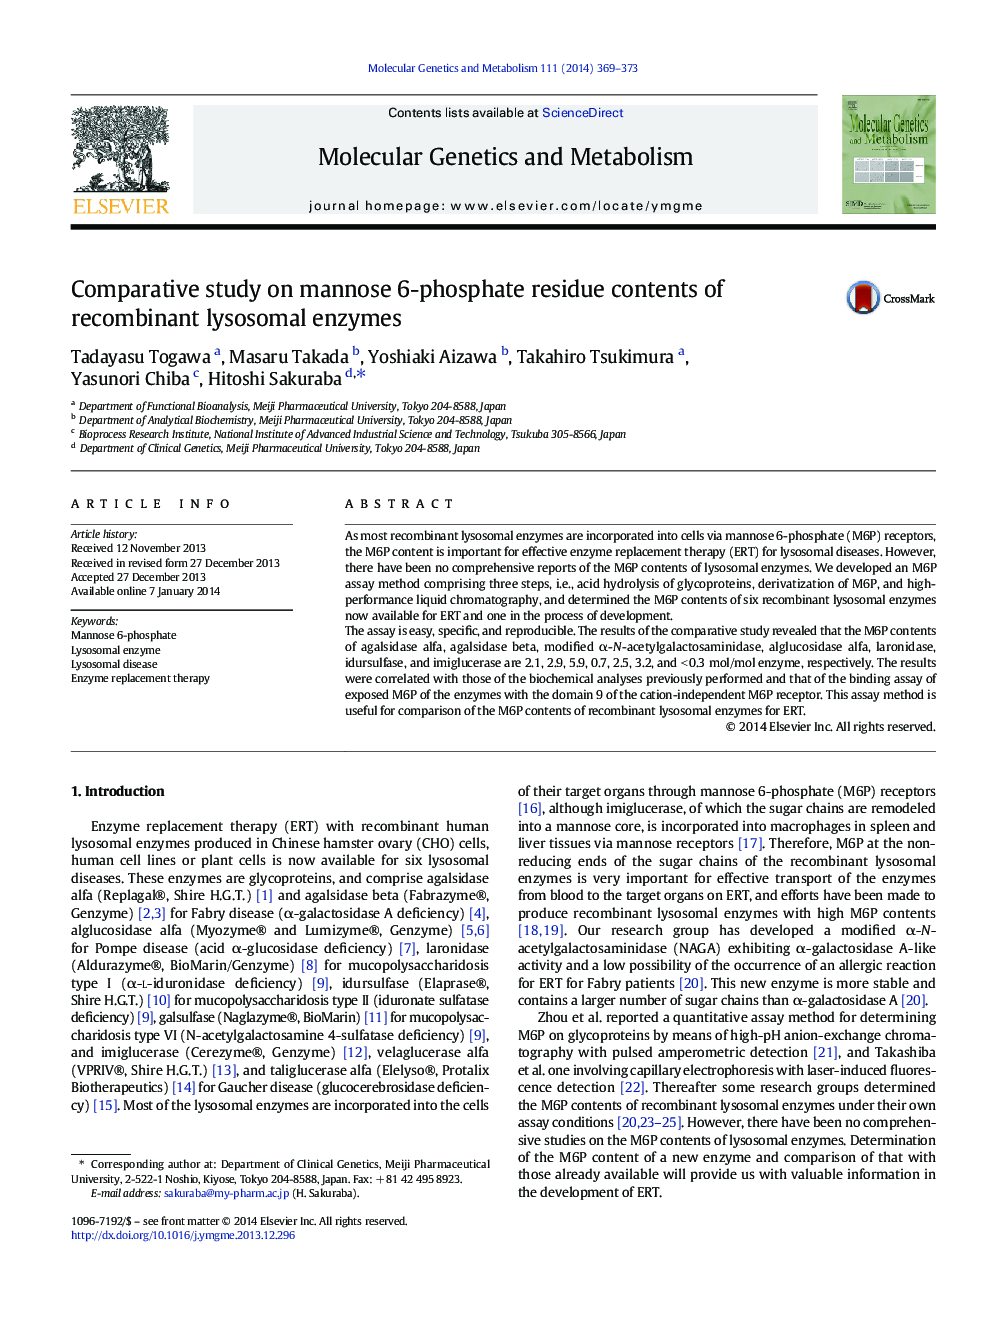 Comparative study on mannose 6-phosphate residue contents of recombinant lysosomal enzymes